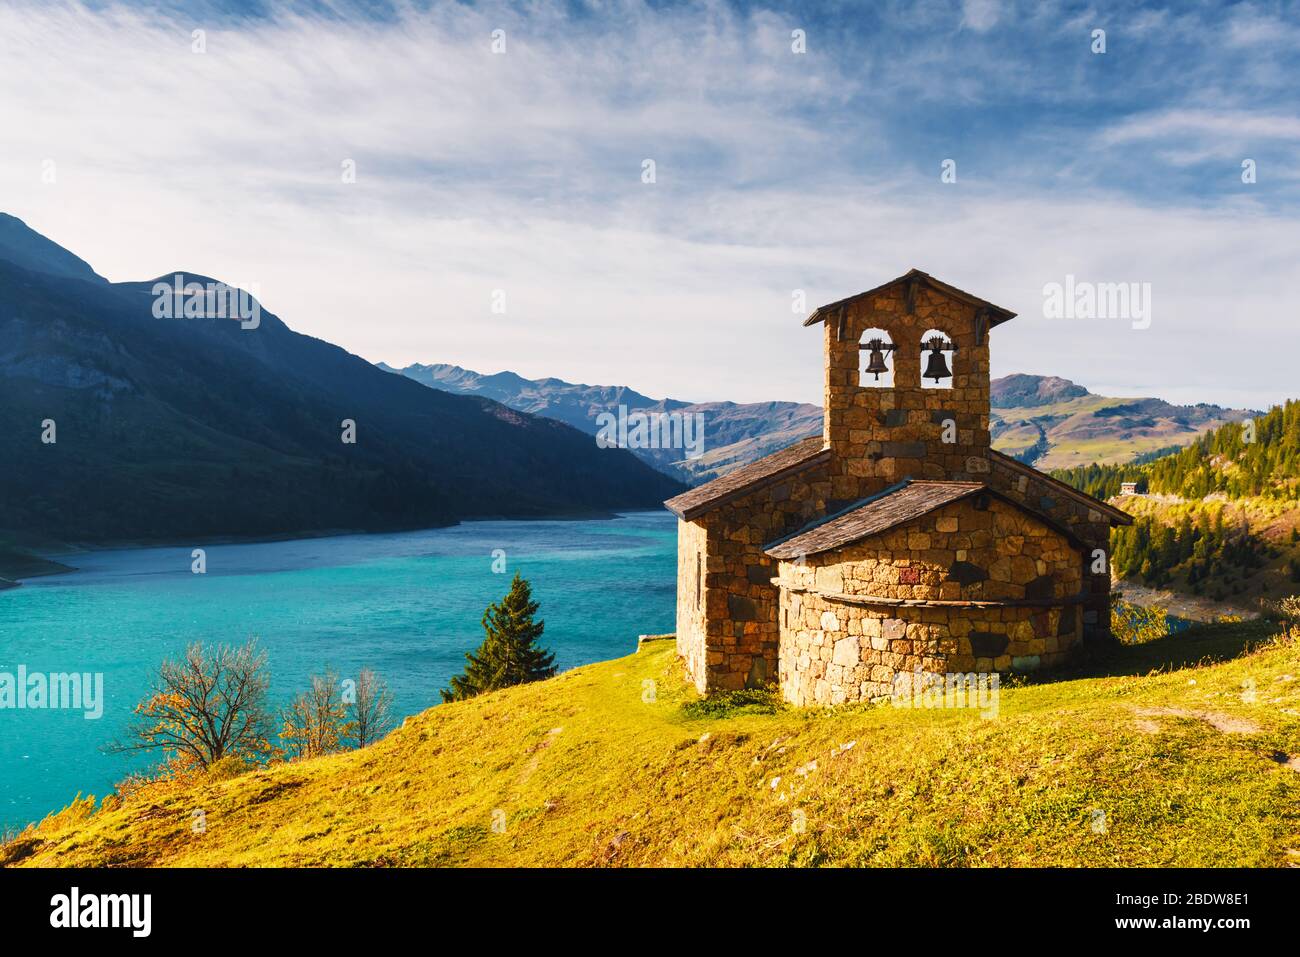 Sunny picturesque view of stone chapel on Roselend lake (Lac de Roselend) in France Alps (Auvergne-Rhone-Alpes). Landscape photography Stock Photo